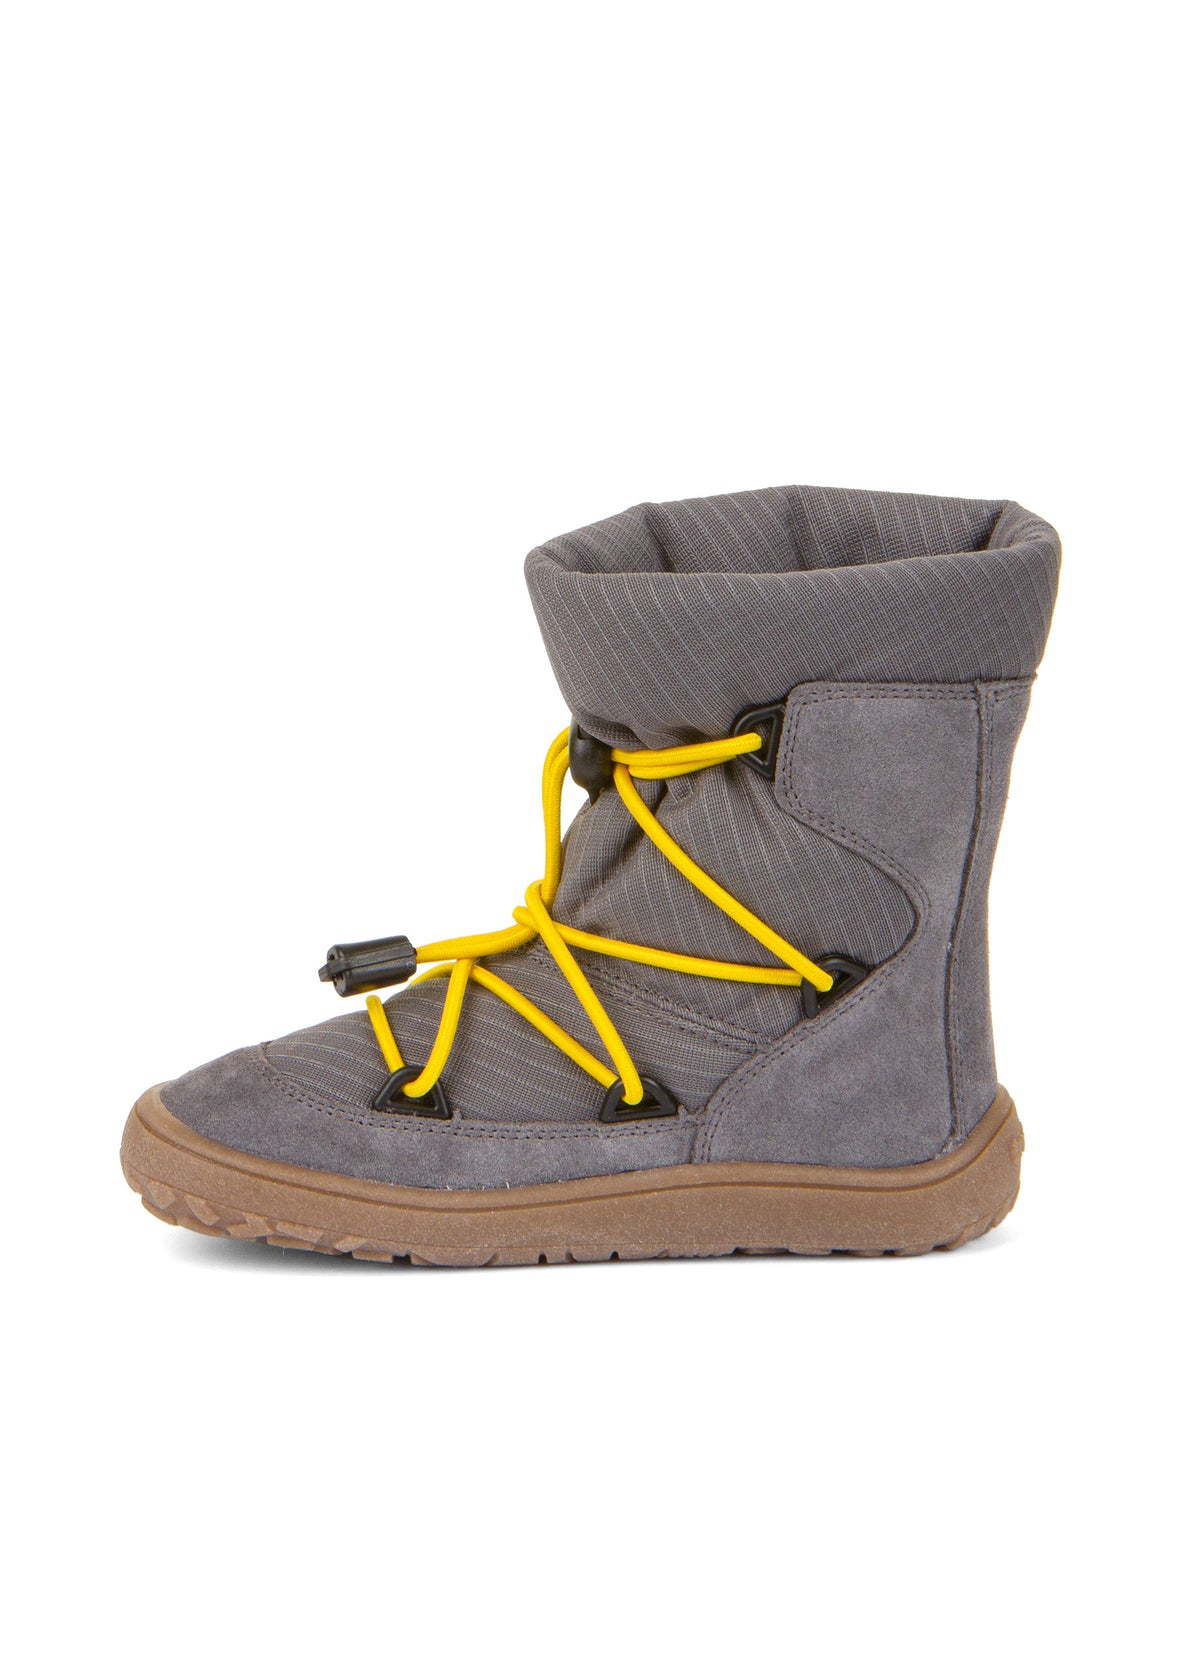 Barefoot shoes - winter boots, TEX Track Wool - gray